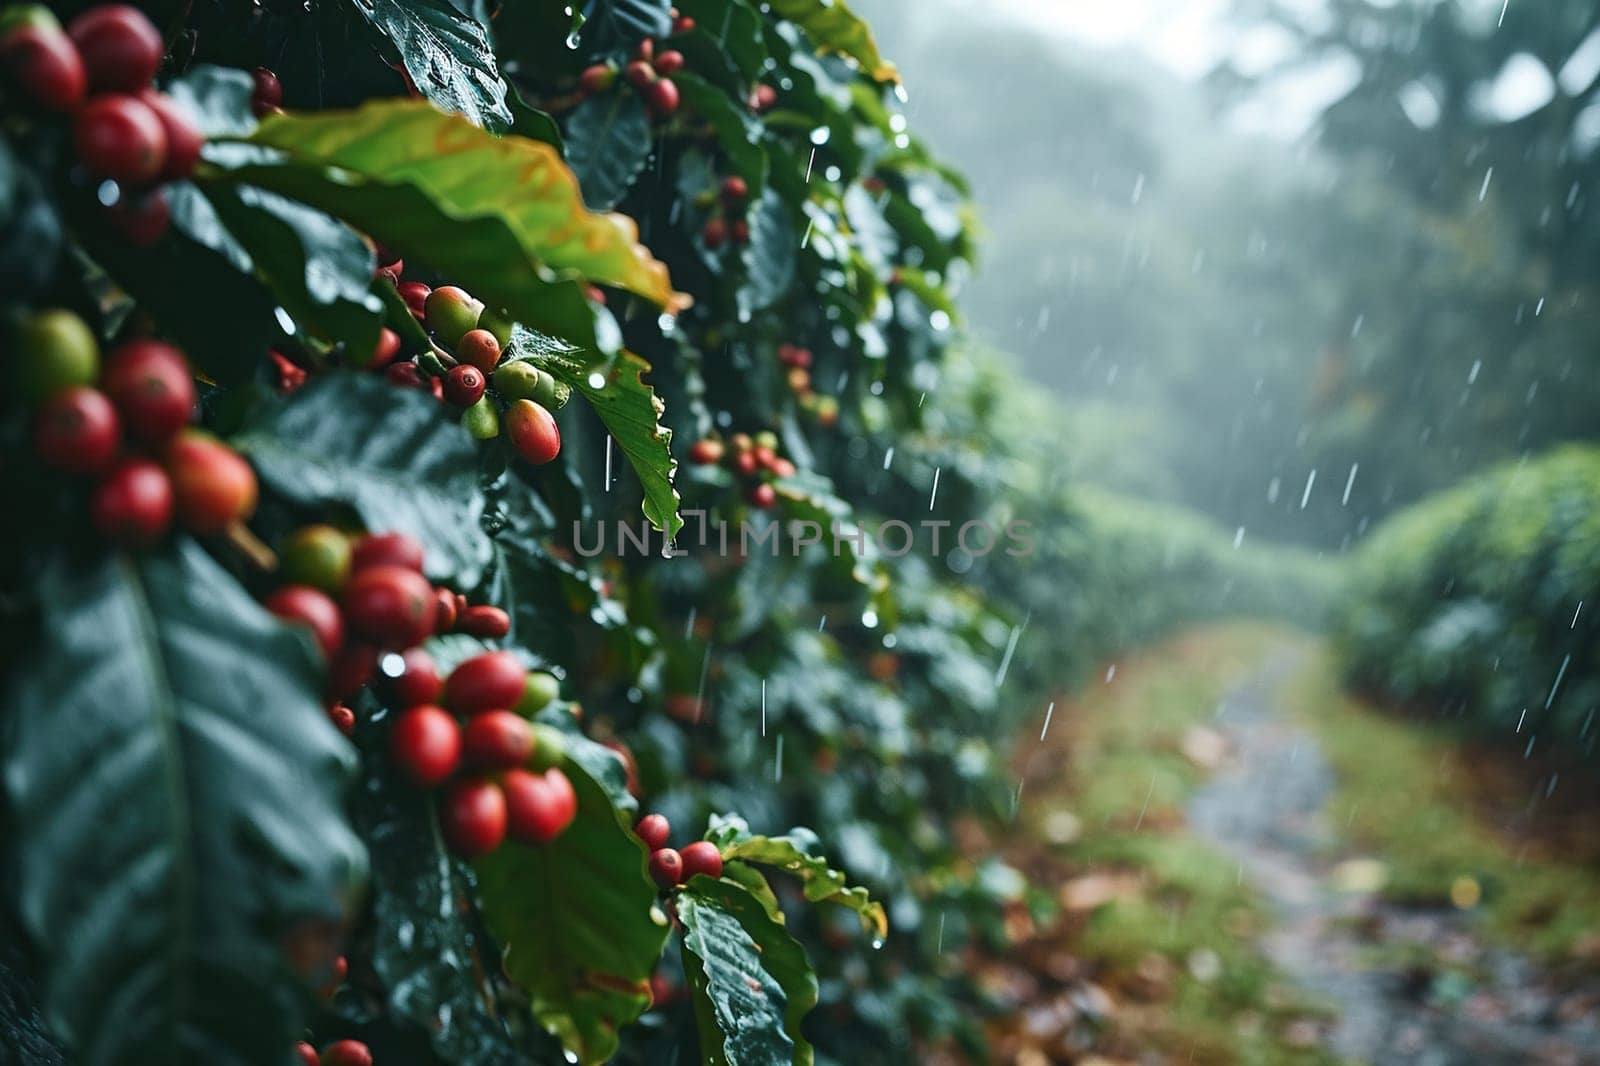 Coffee bushes with ripe coffee beans in the rain. Generated by artificial intelligence by Vovmar